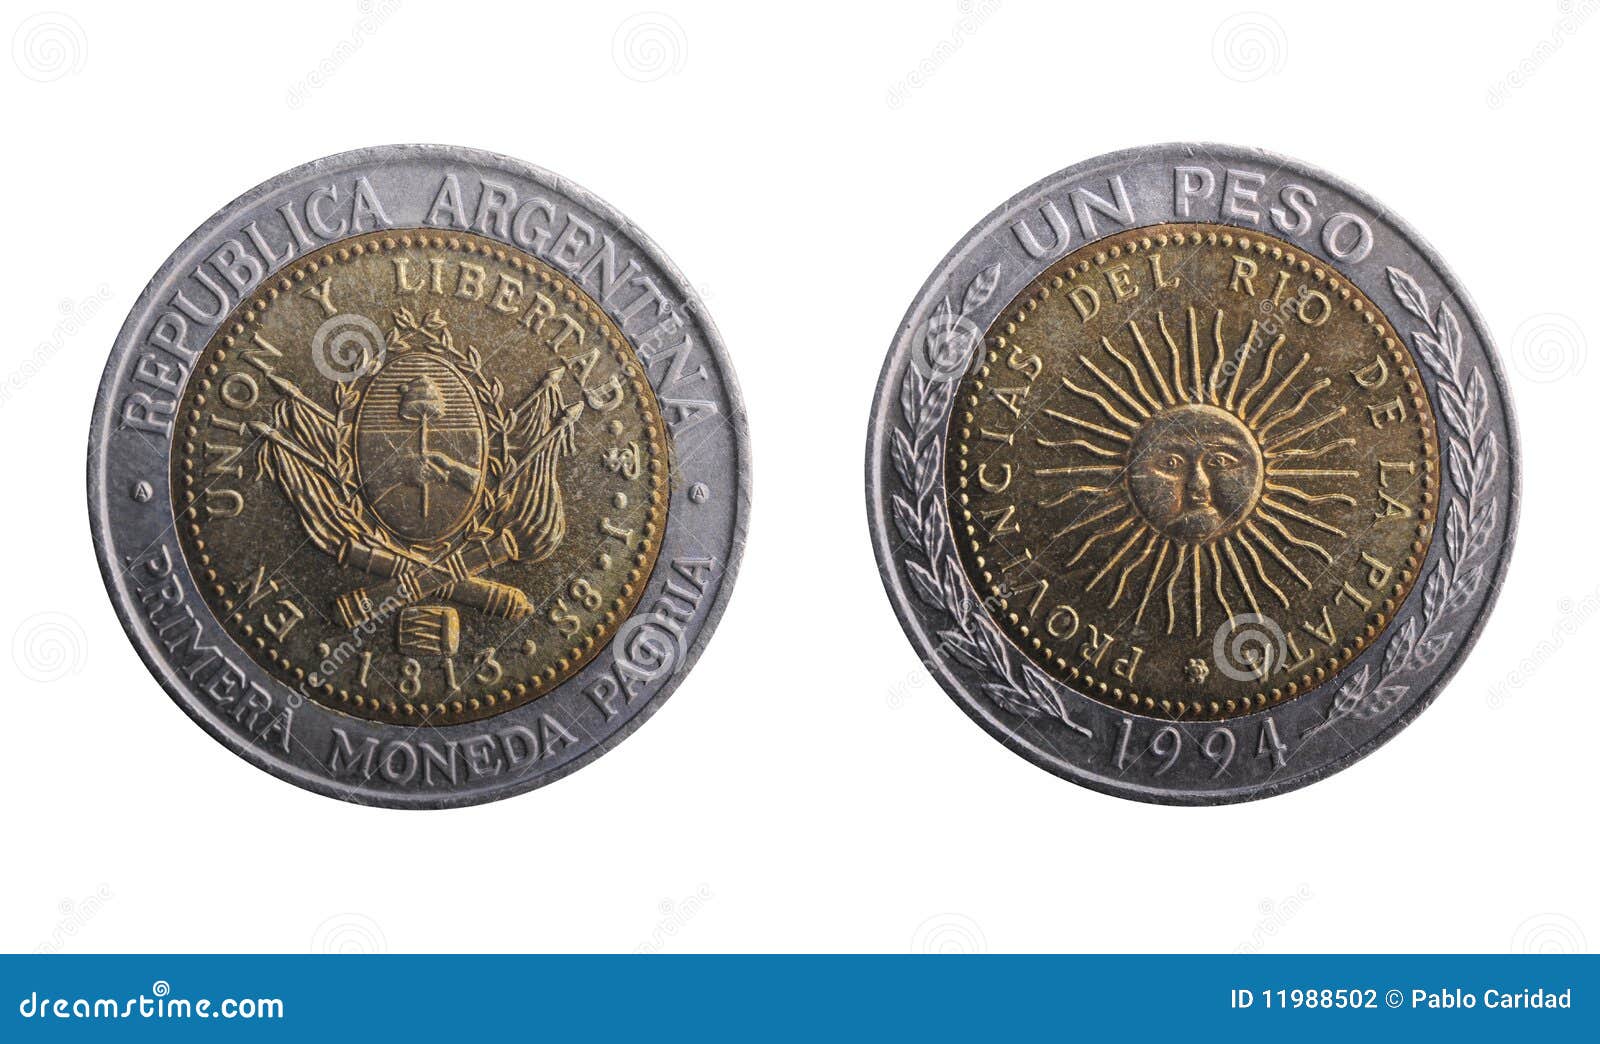 argentinian peso coin, both sides.